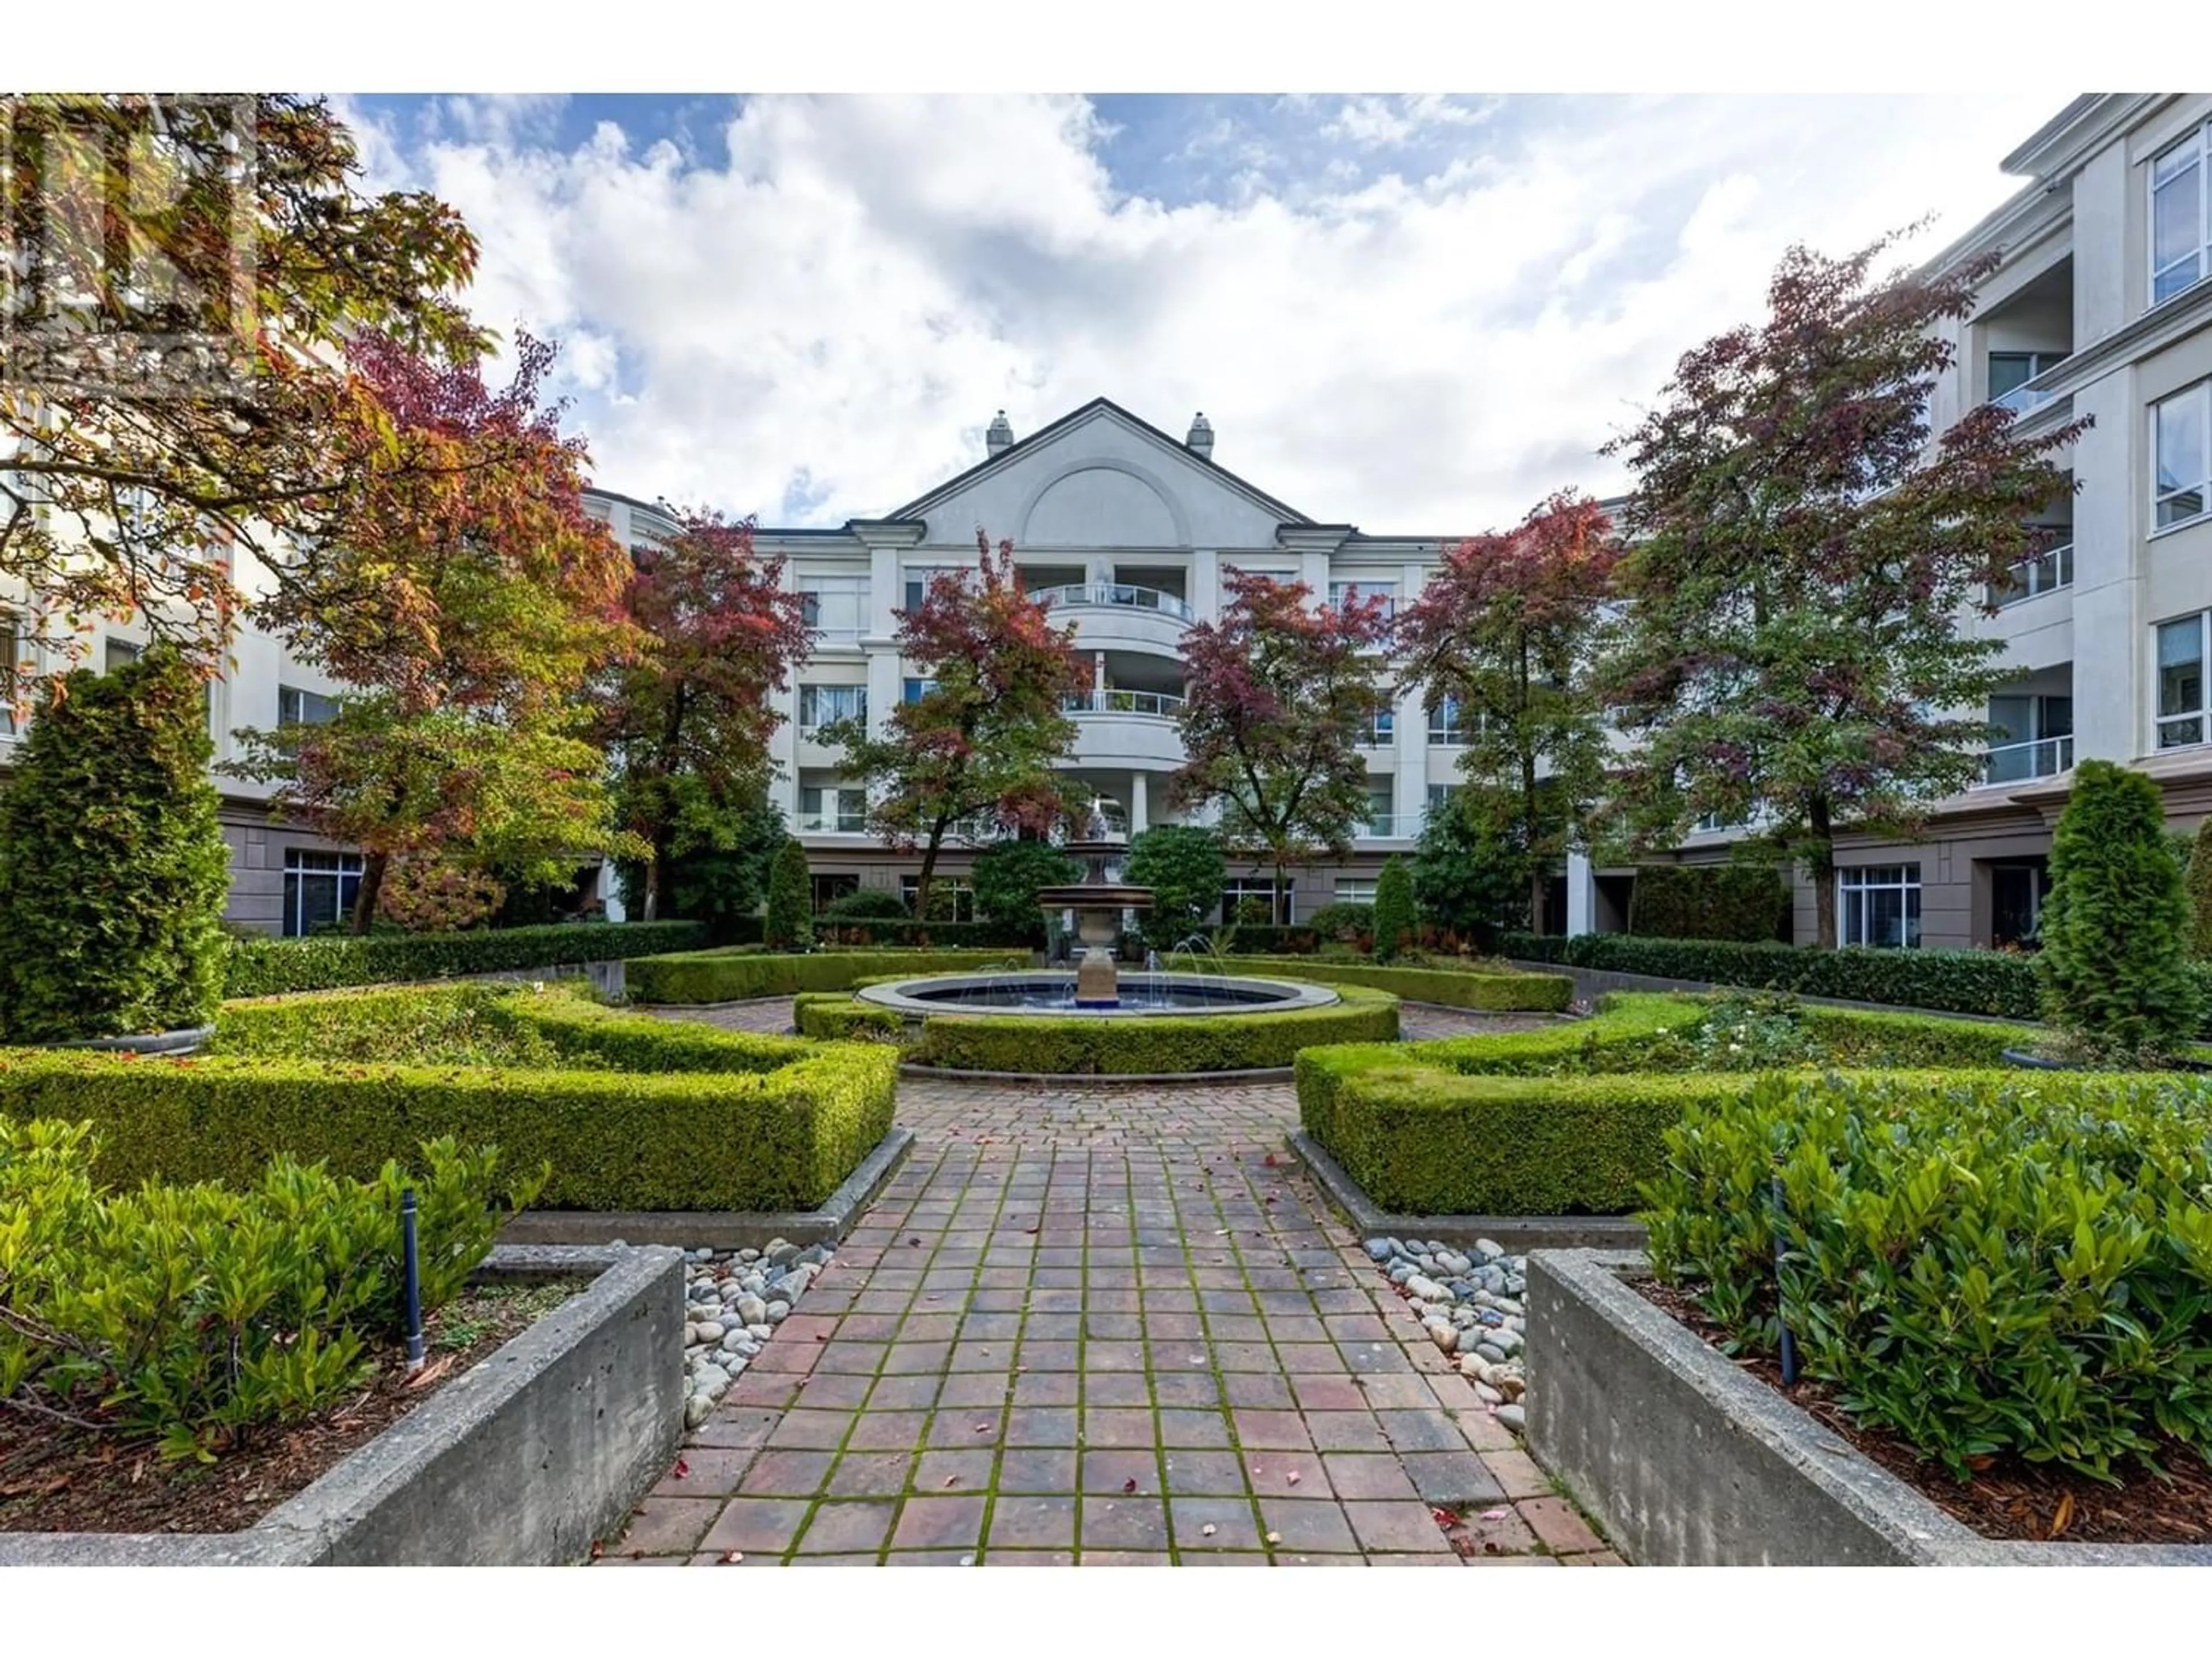 A pic from exterior of the house or condo for 323 5735 HAMPTON PLACE, Vancouver British Columbia V6T2G8